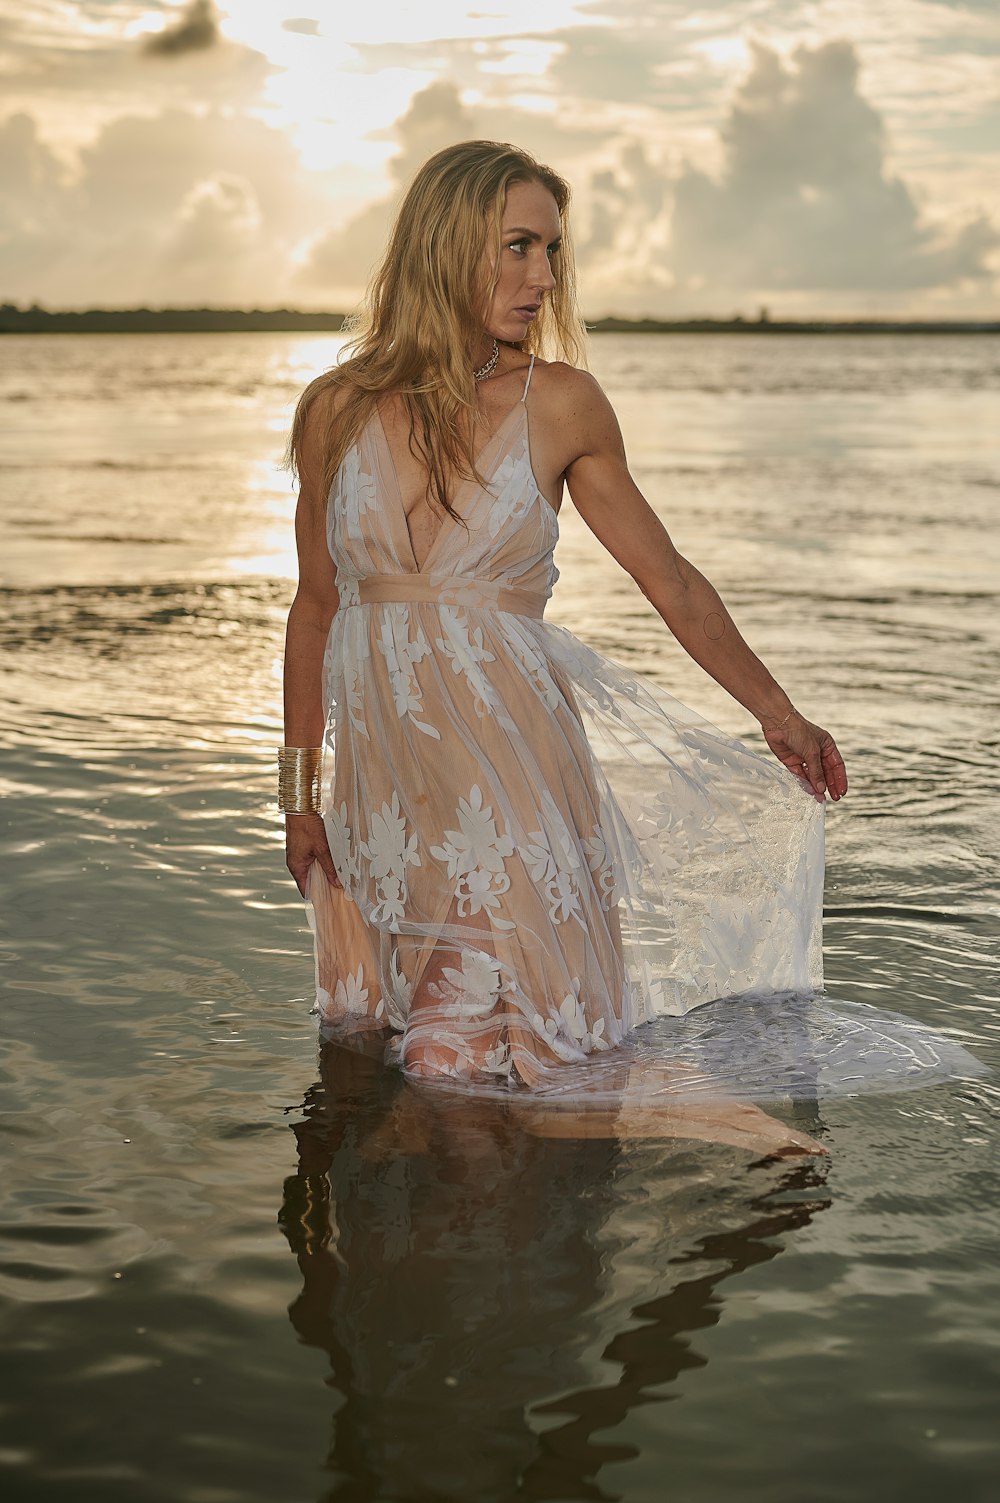 a person in a white dress standing in water